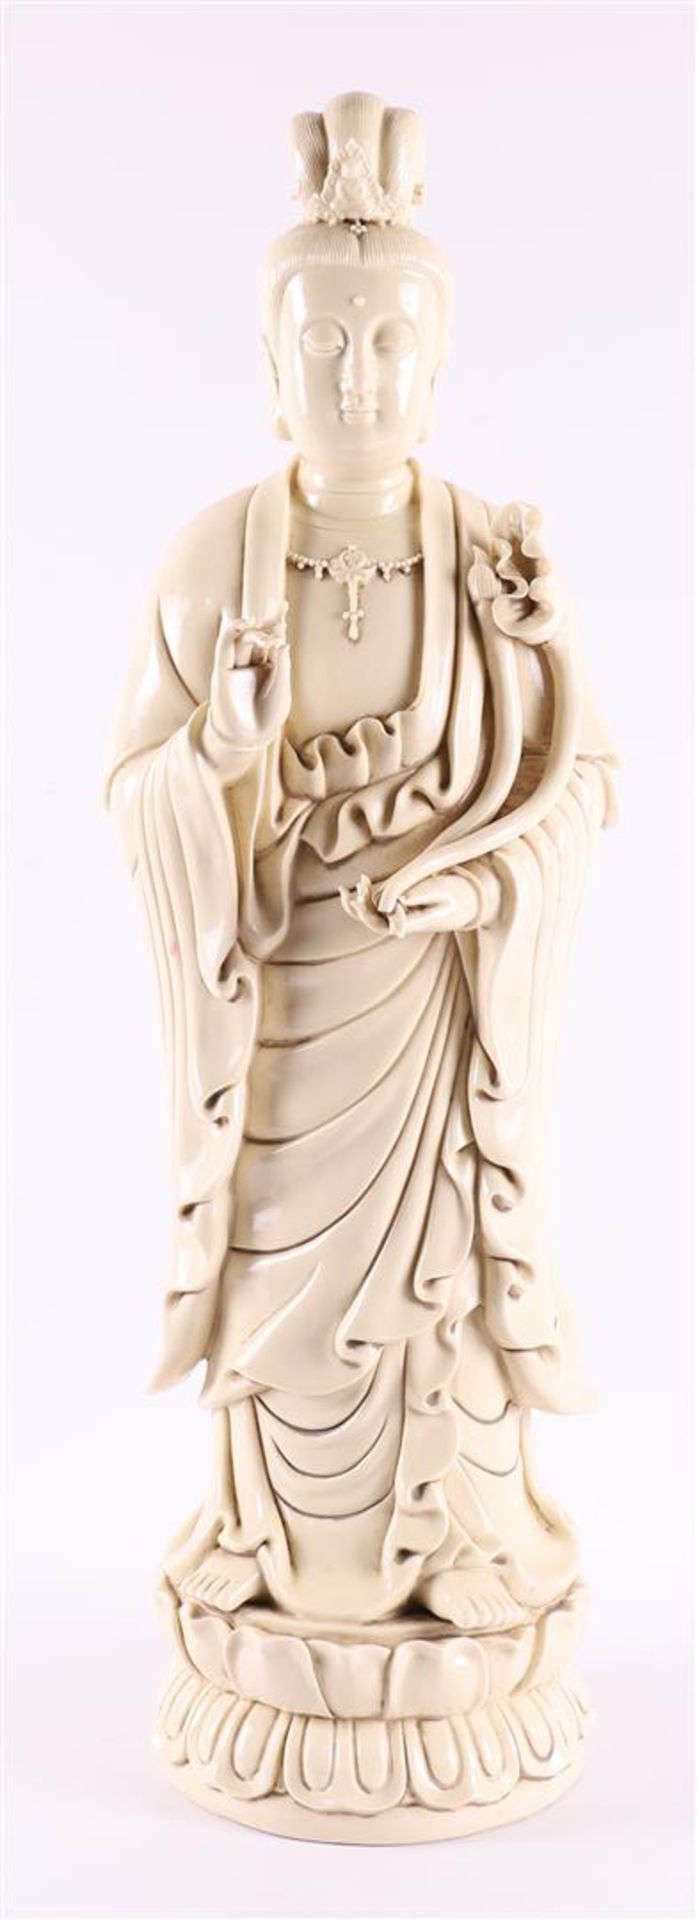 A white Chinese Kwan Yin standing on a lotus crown, China, 20th century.